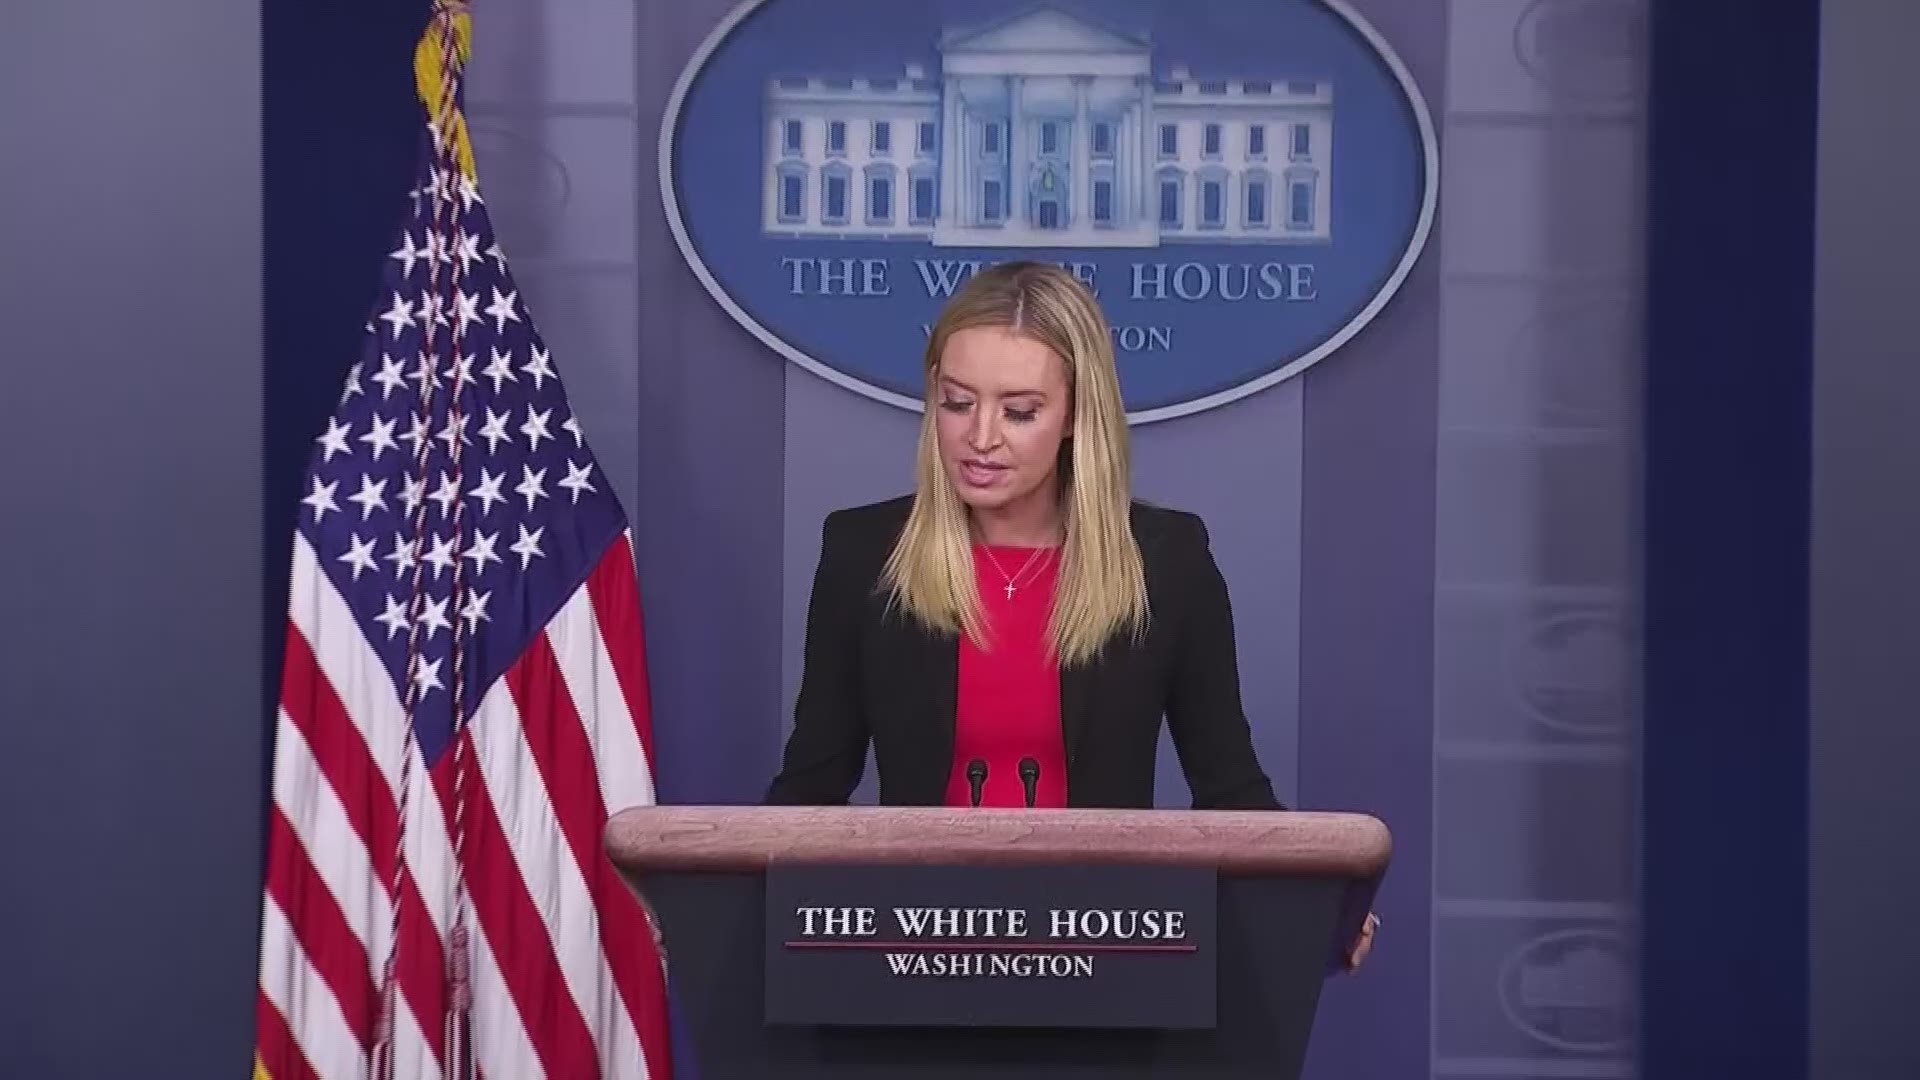 Following a day of violence in the nation's capital, White House Press Secretary Kayleigh McEnany holds a press briefing at the White House.